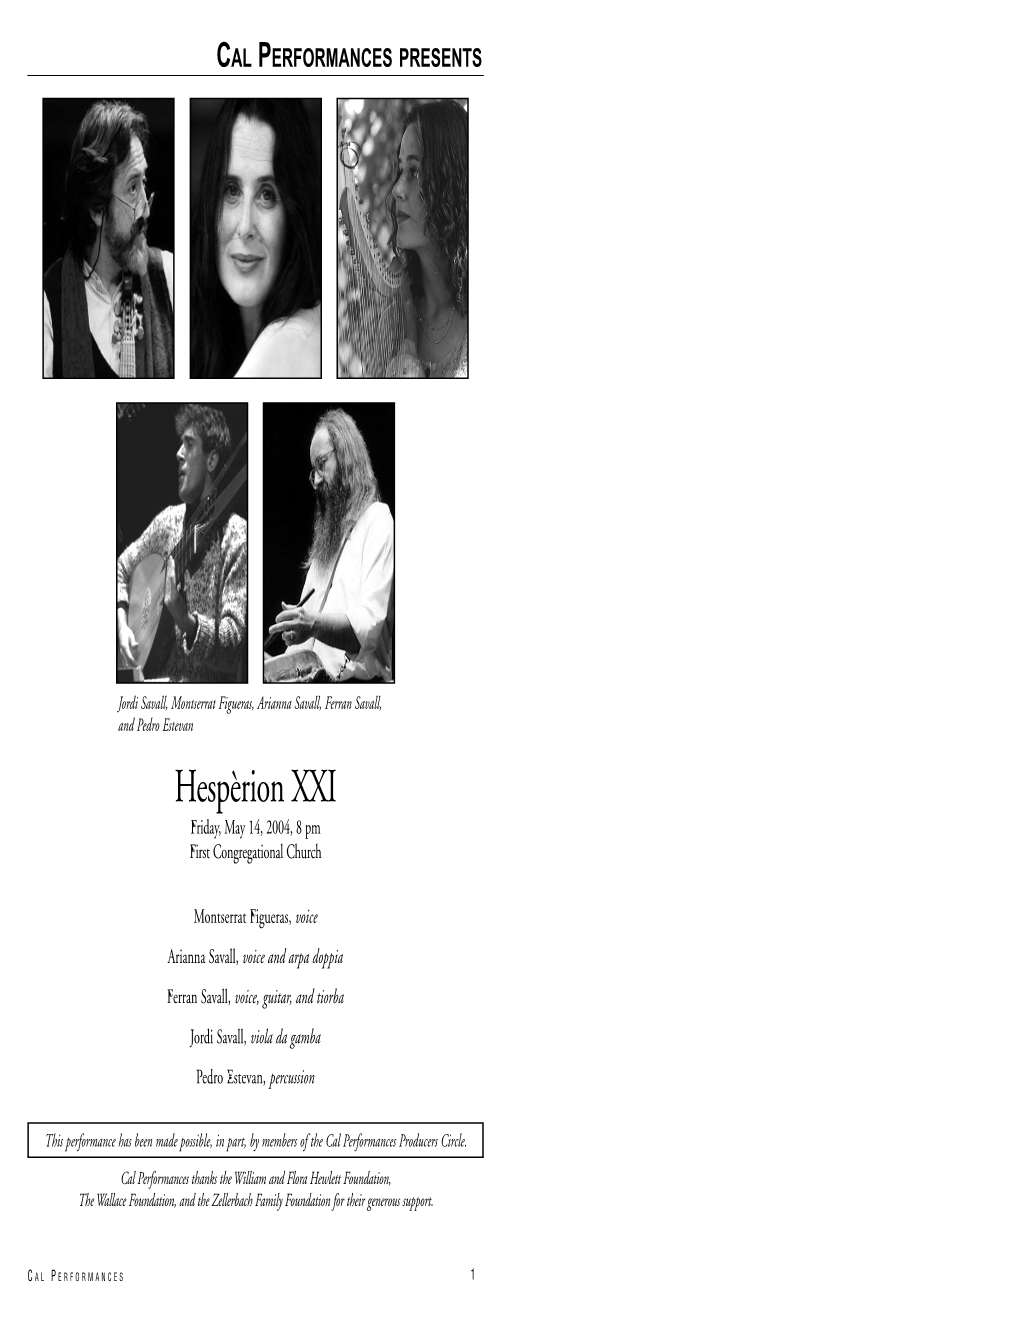 Hespèrion XXI Friday, May 14, 2004, 8 Pm First Congregational Church